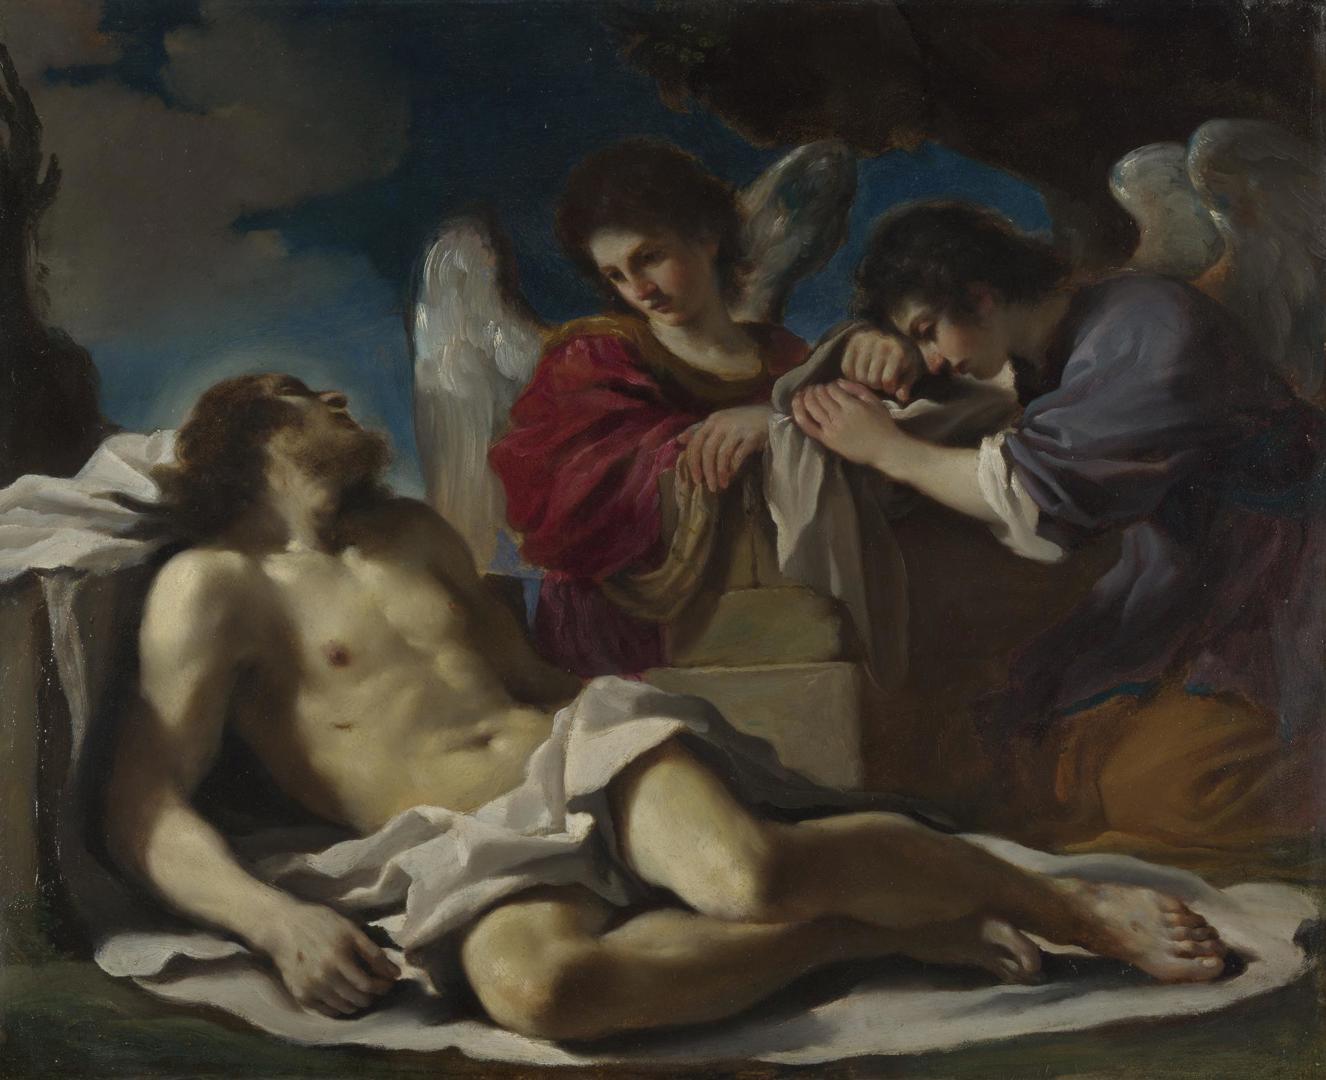 The Dead Christ mourned by Two Angels by Guercino